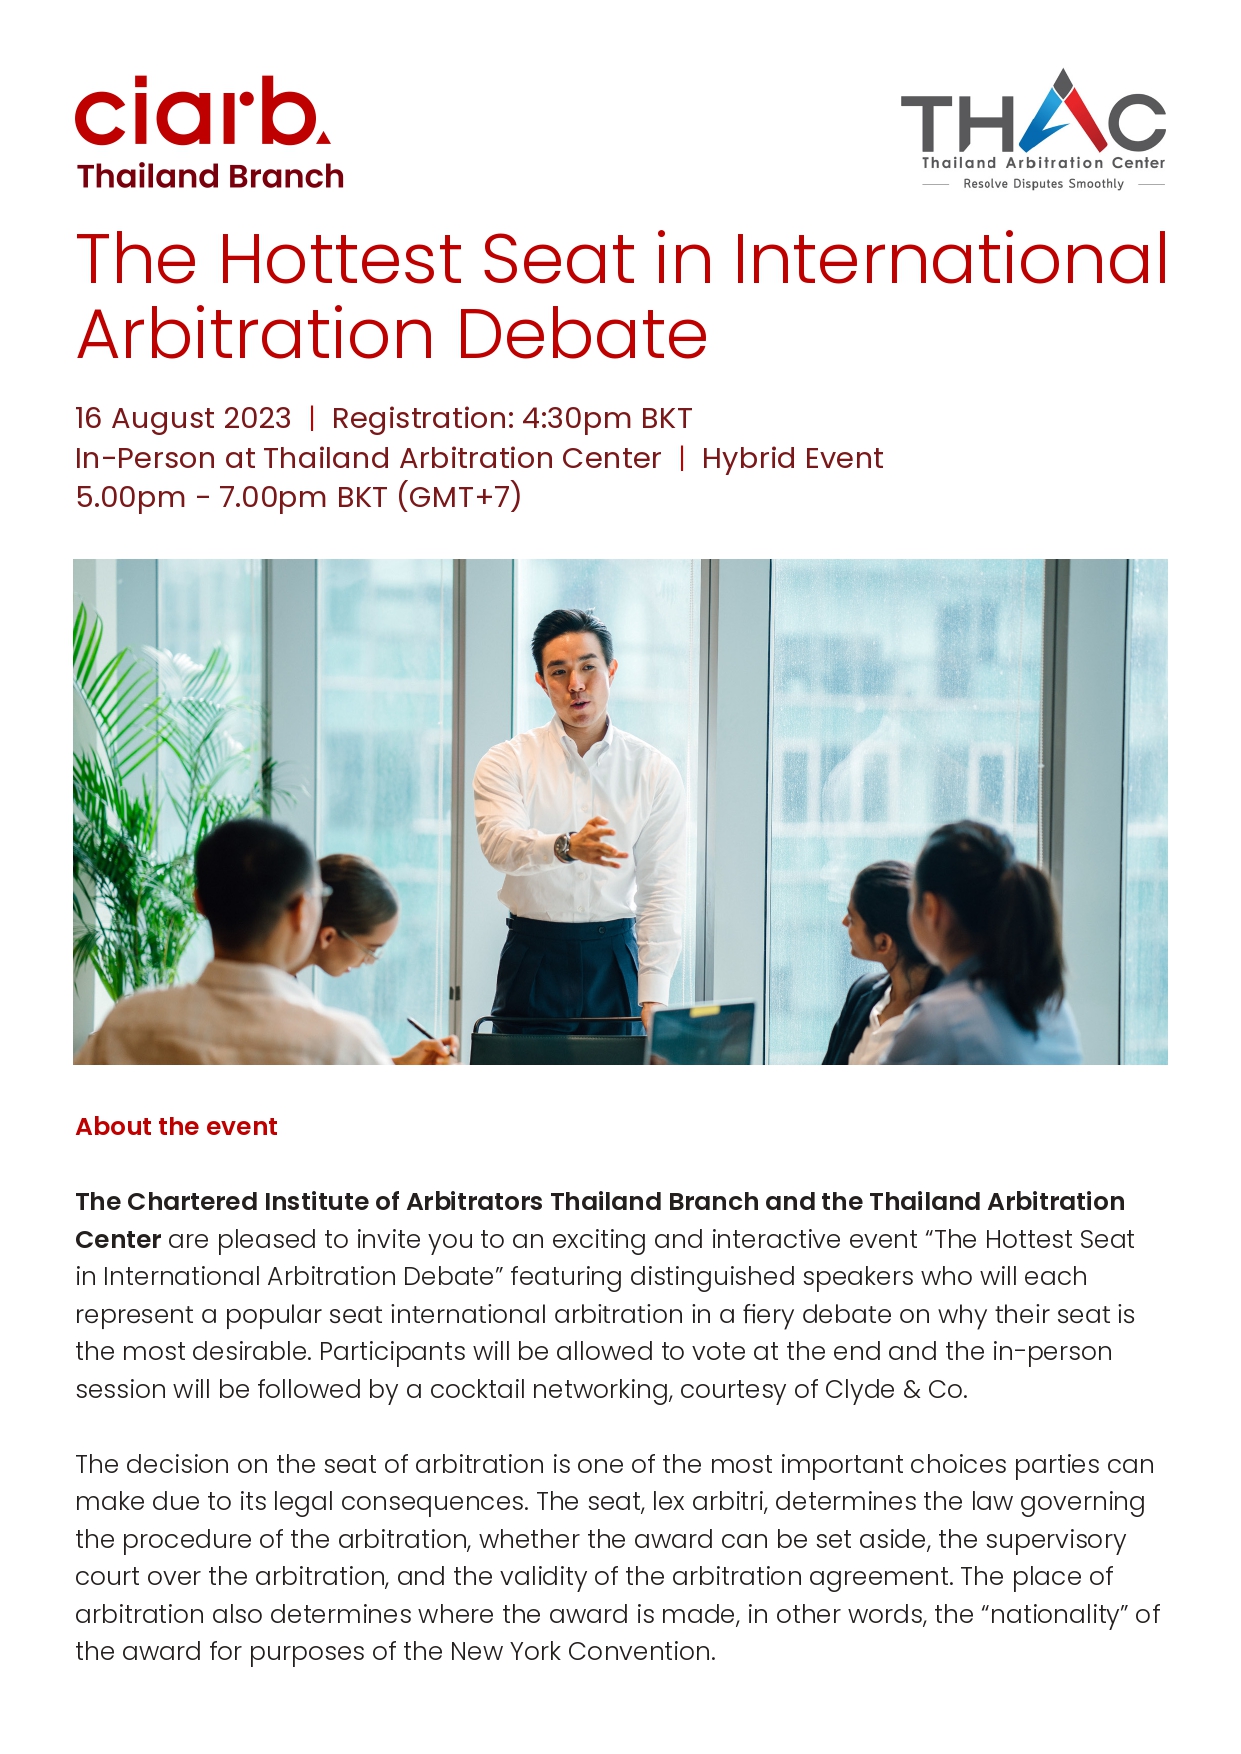 The Hottest Seat in International Arbitration Debate